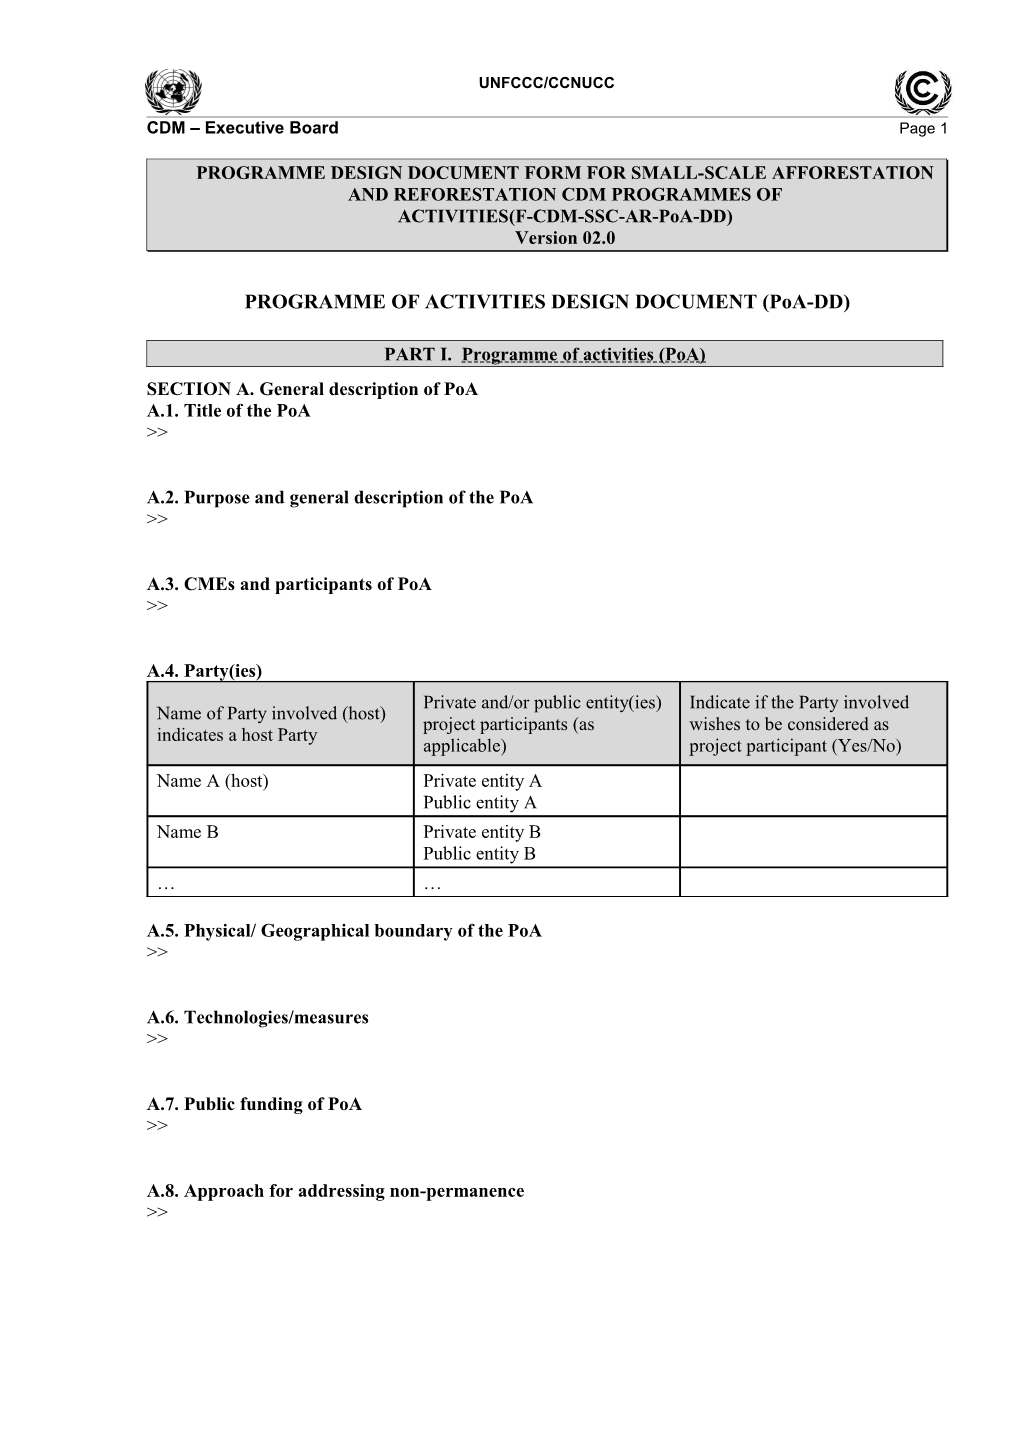 F-CDM-SSC-AR-Poa-DD: Programme Design Document Form for Small-Scale Afforestation And